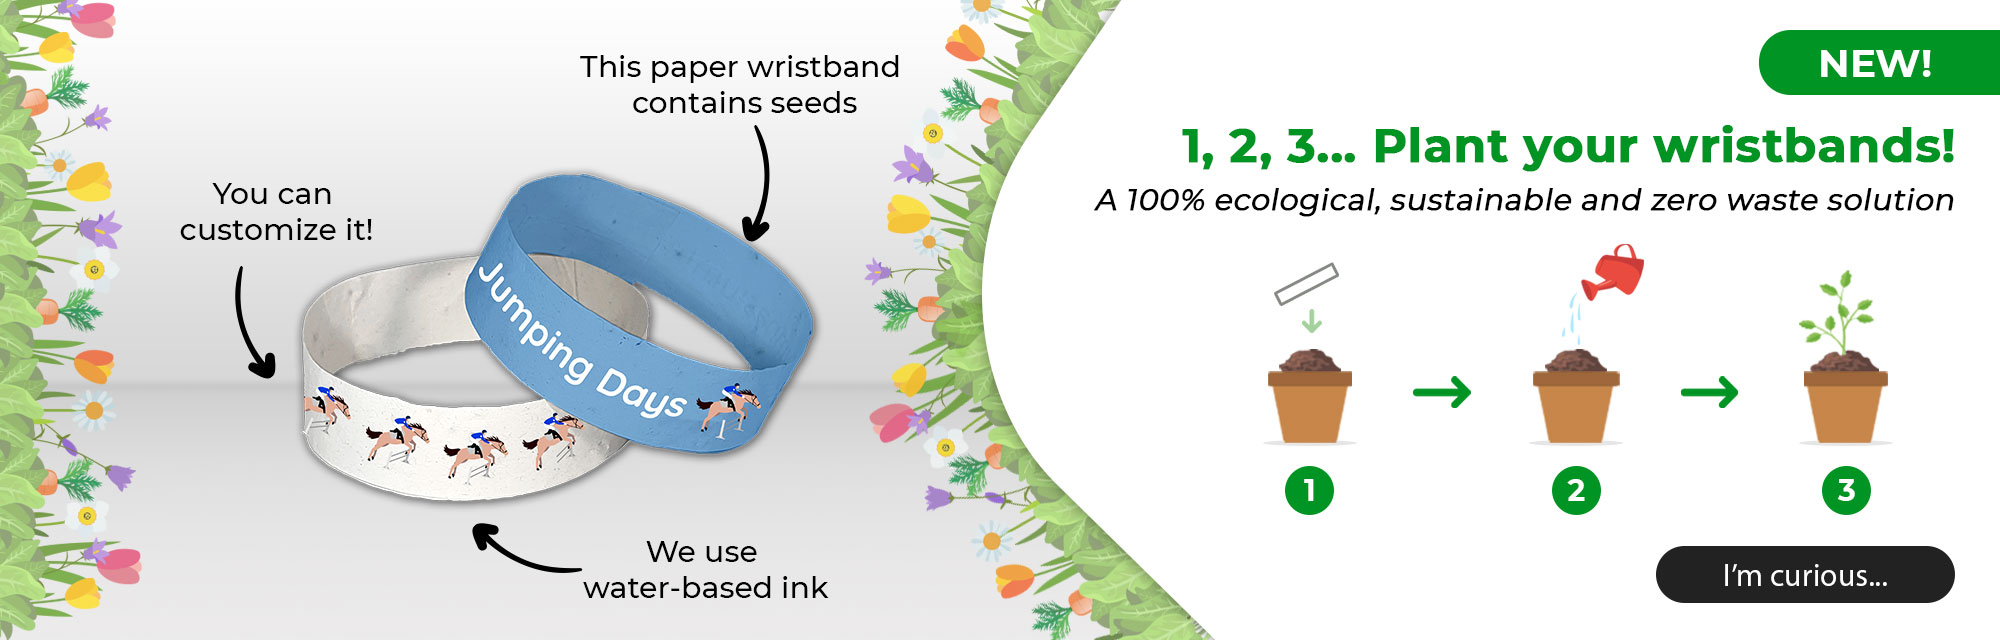 Seed wristbands